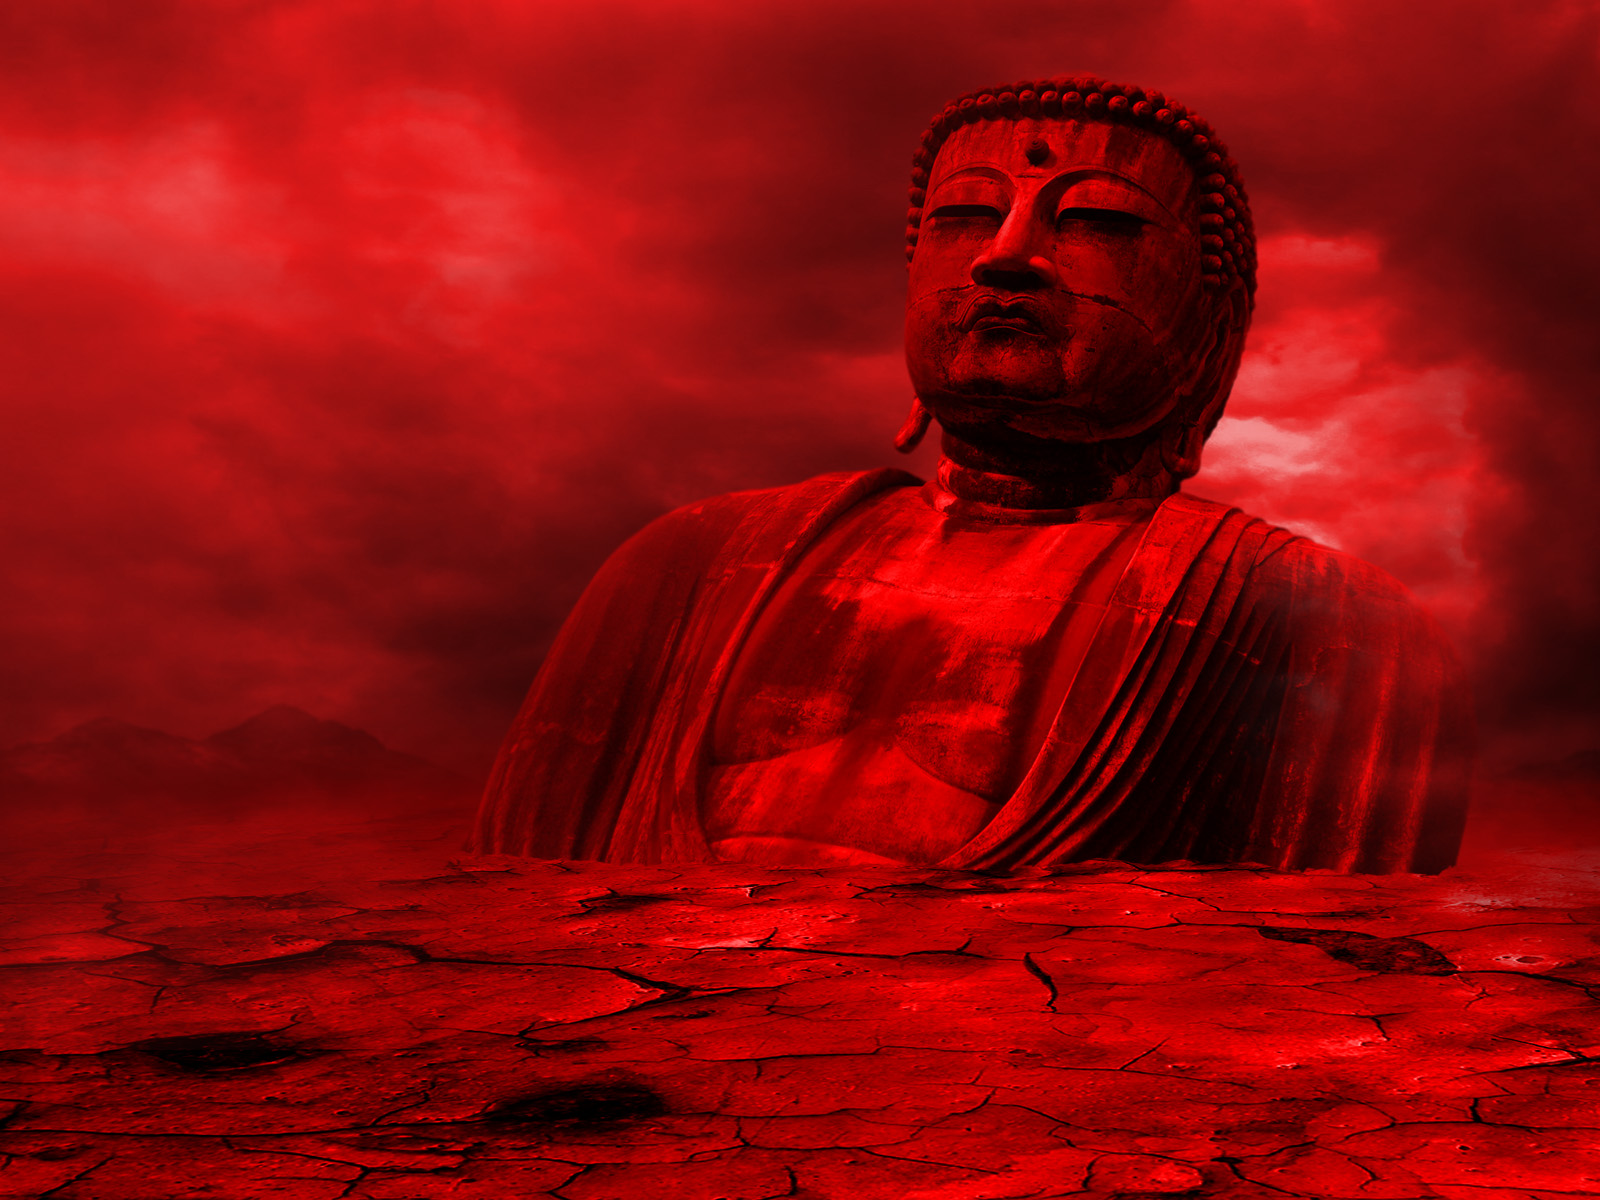 Buddha Wallpapers (63+ pictures)